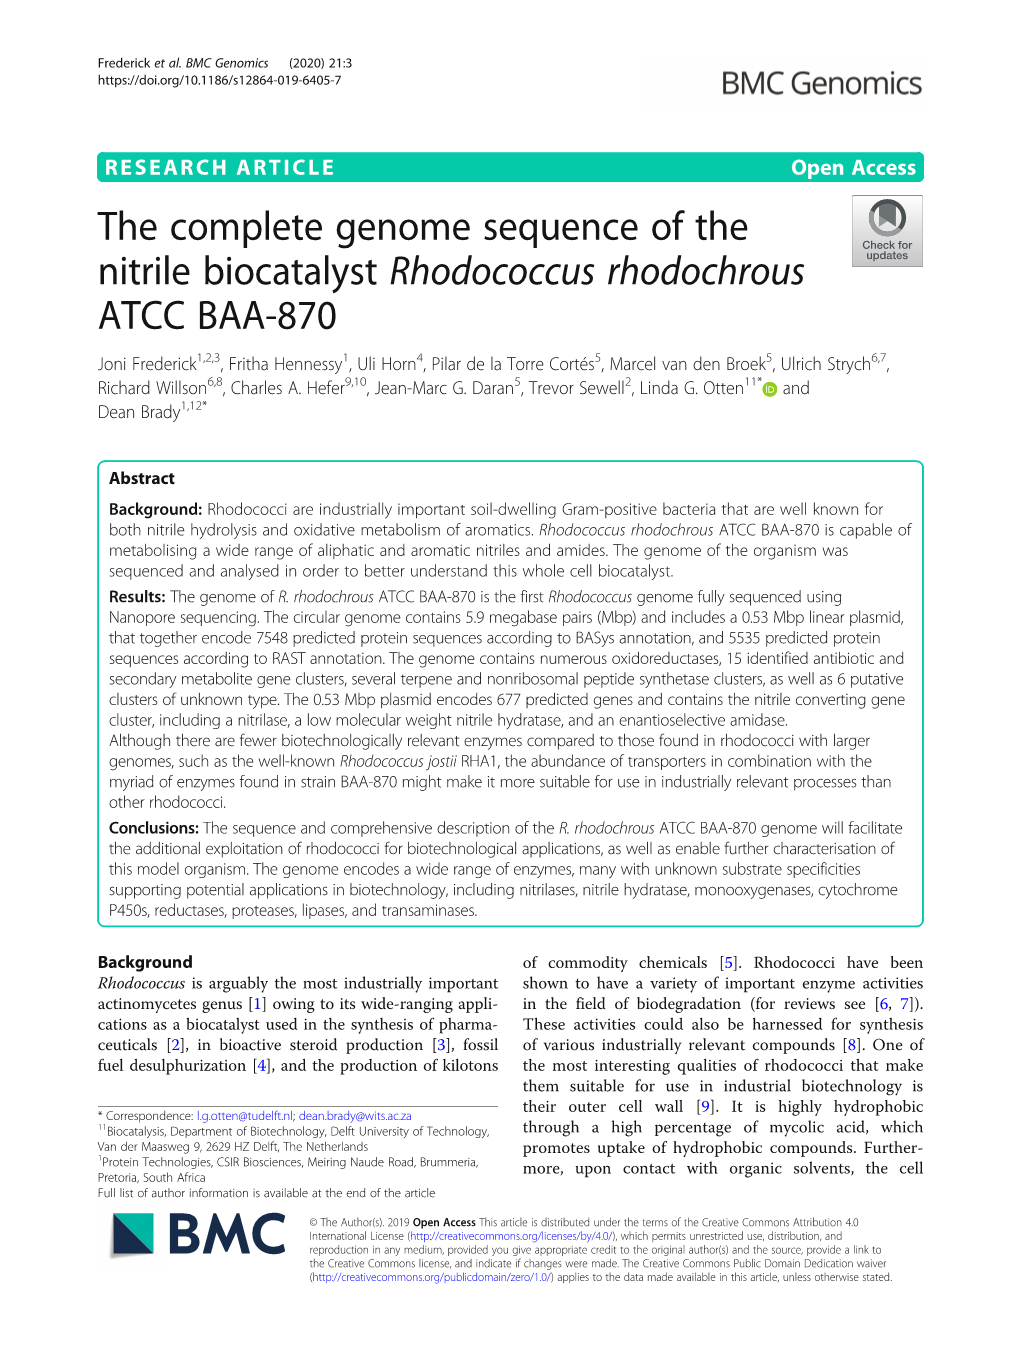 The Complete Genome Sequence of the Nitrile